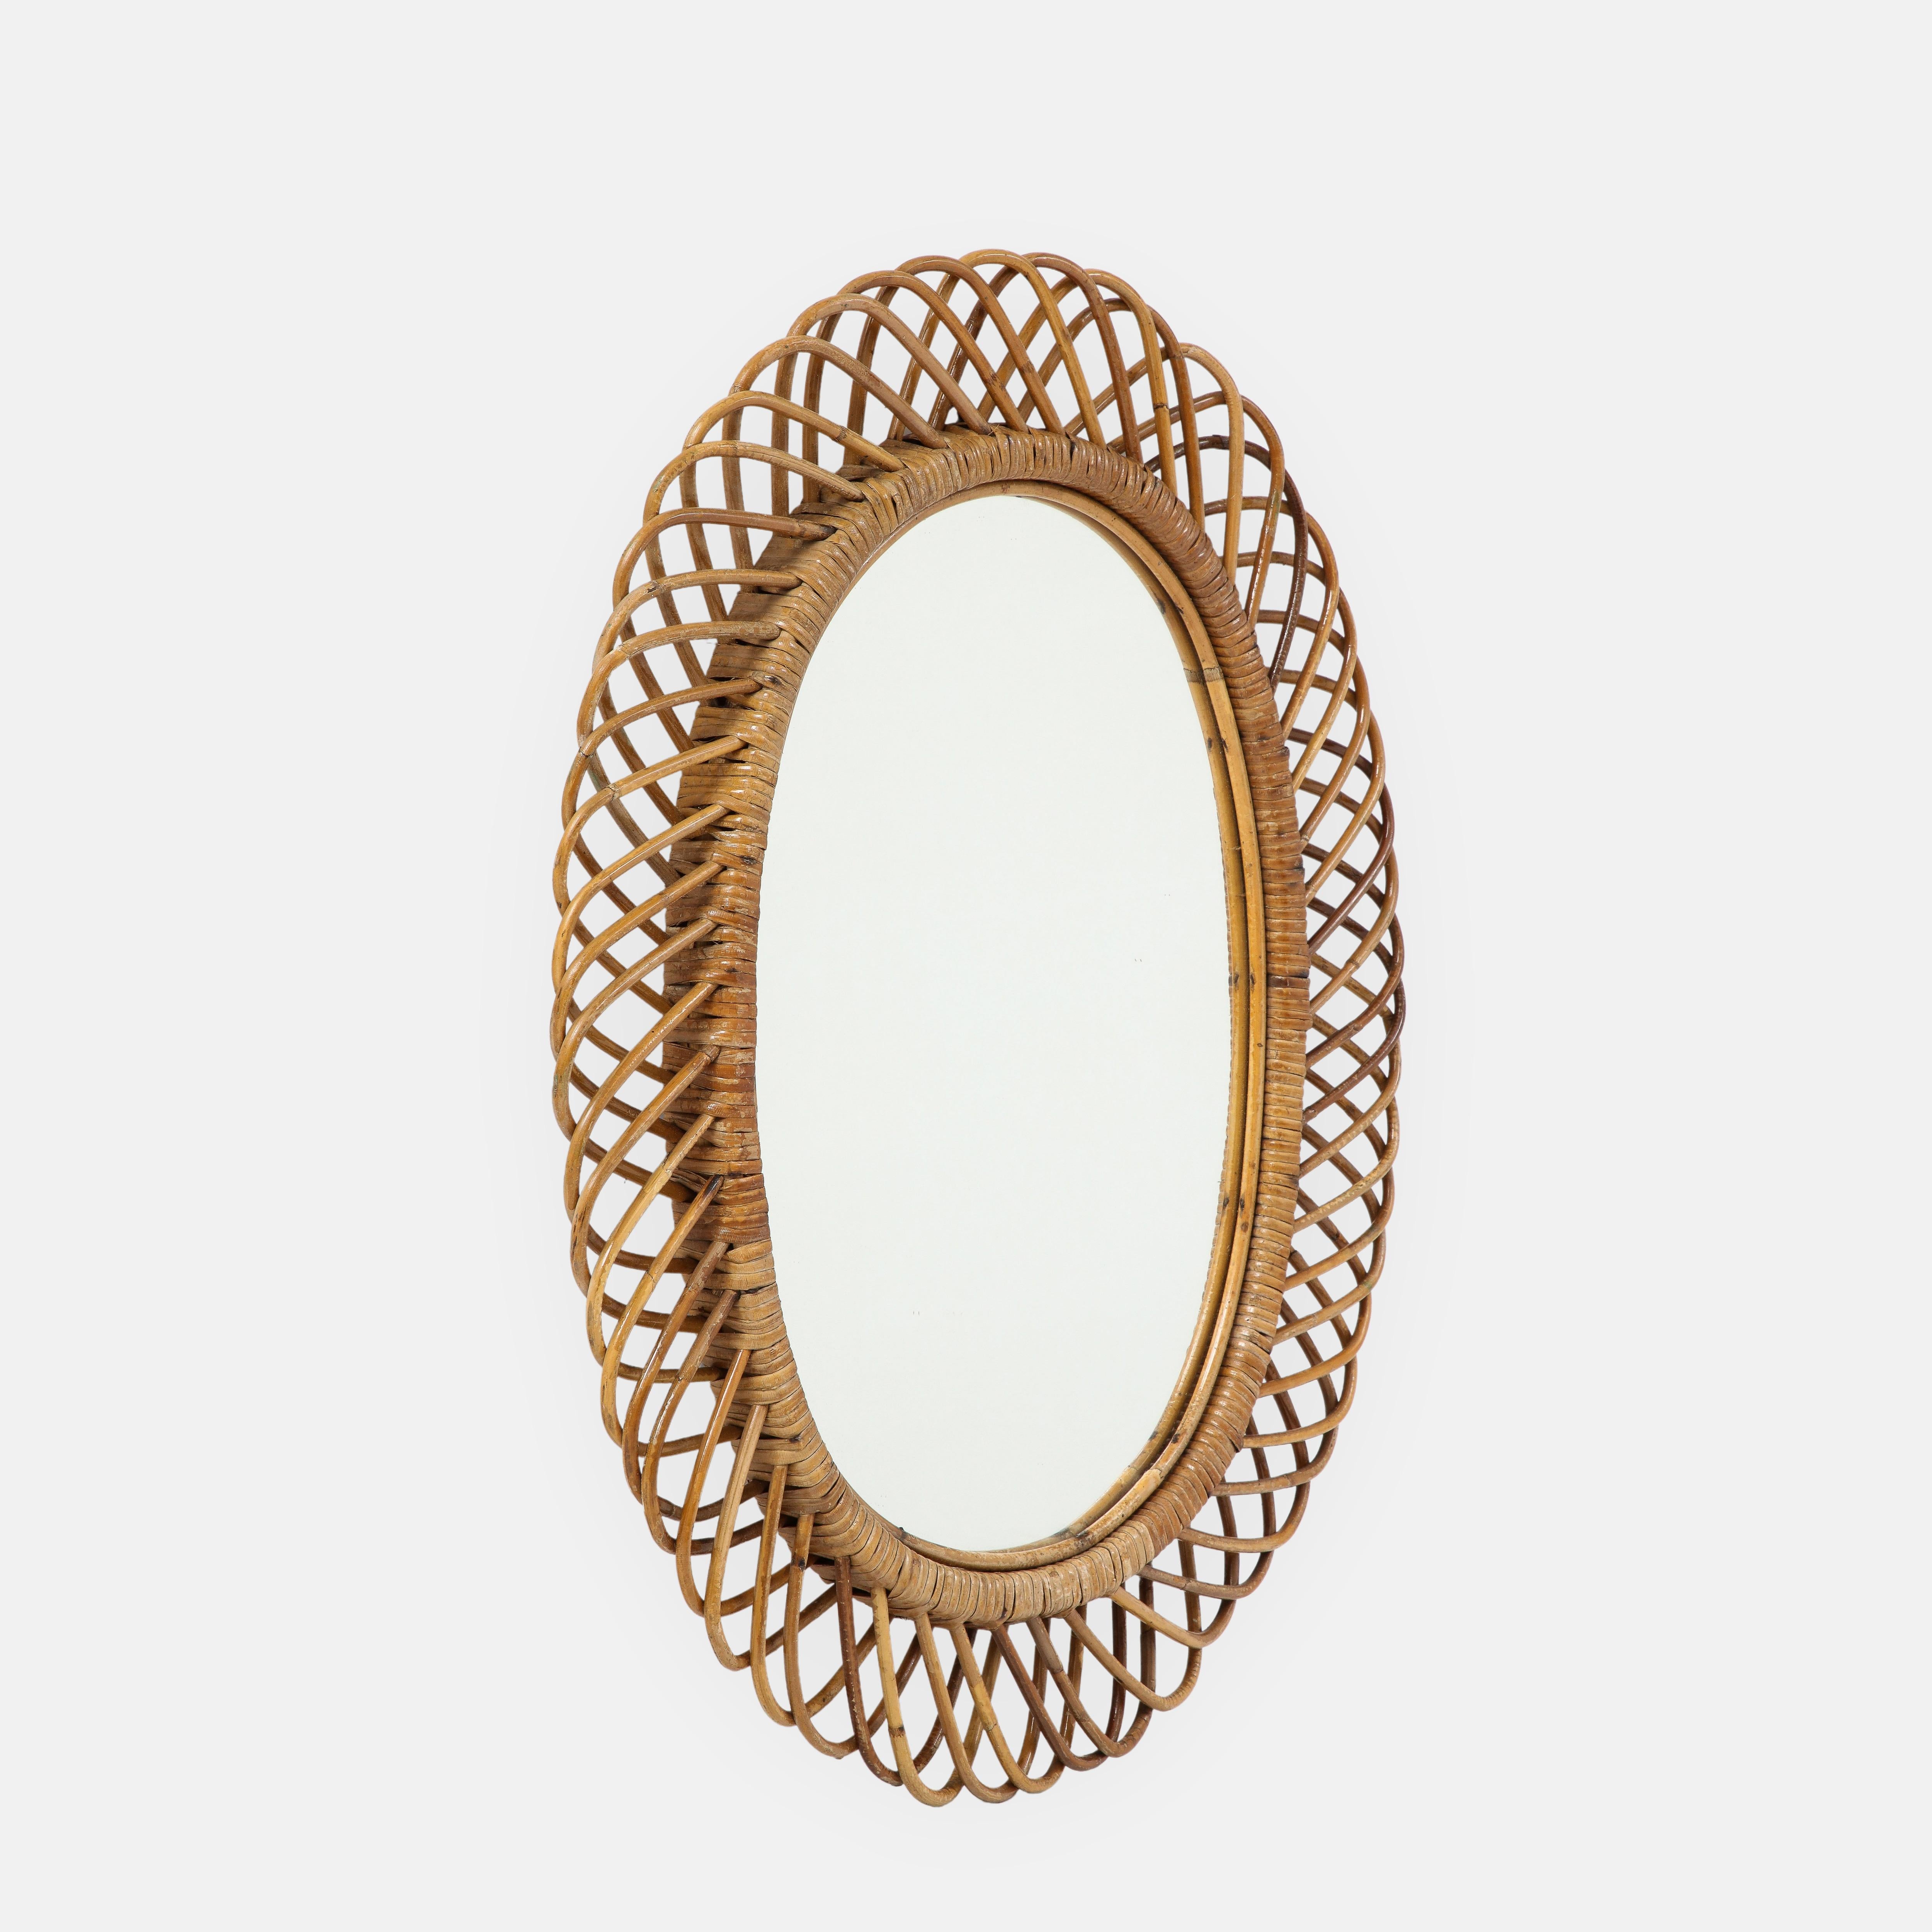 Franco Albini for Bonacina oval bamboo and rattan wall mirror, Italy, 1950s. This chic and iconic Italian mid-century mirror is intricately hand-woven with bamboo and rattan, then stained and lacquered. Original red velvet on backside of mirror.